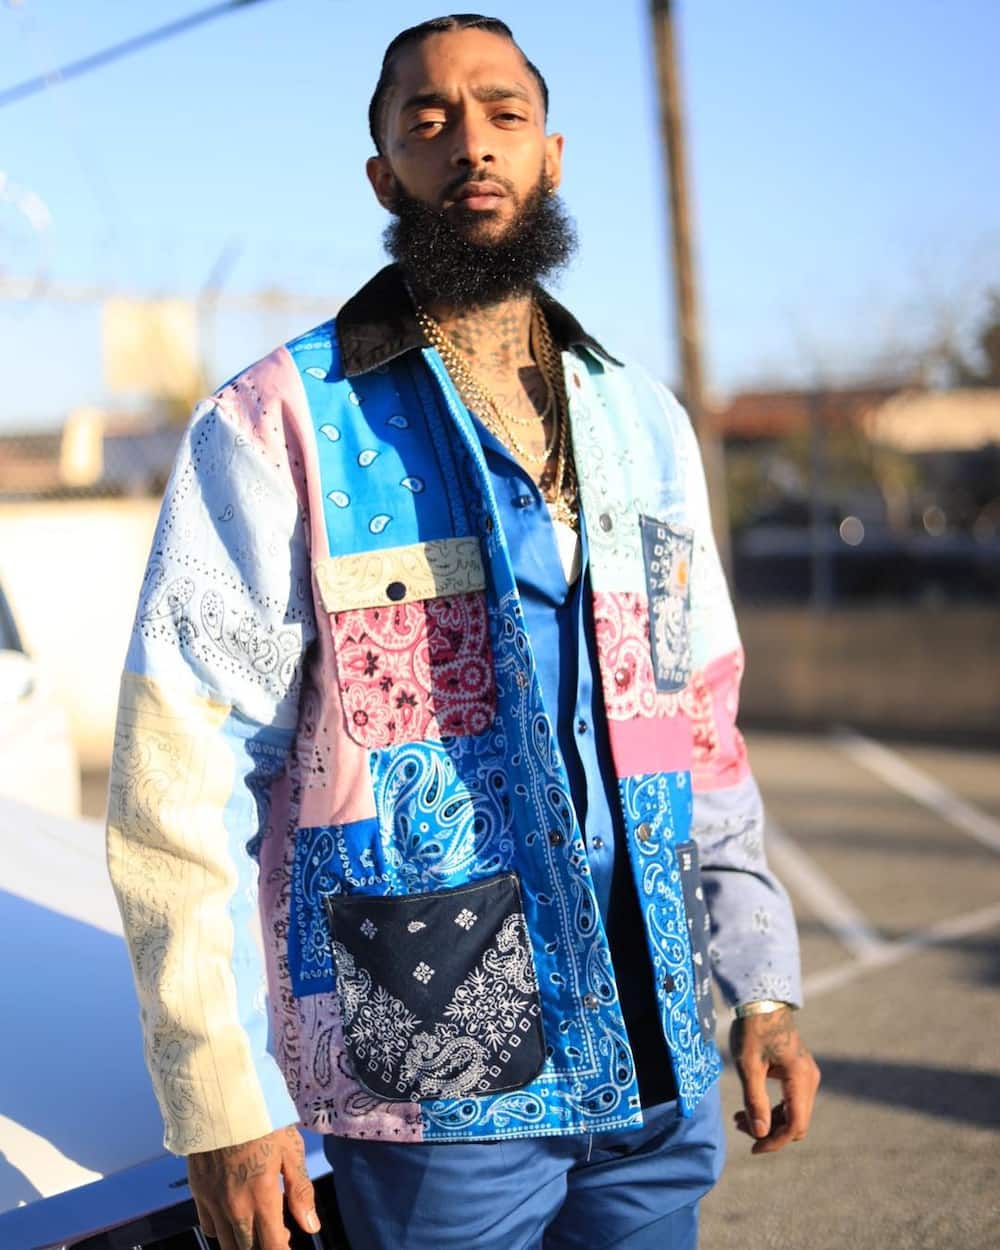 Nipsey Hussle net worth 2019: How much was he worth?